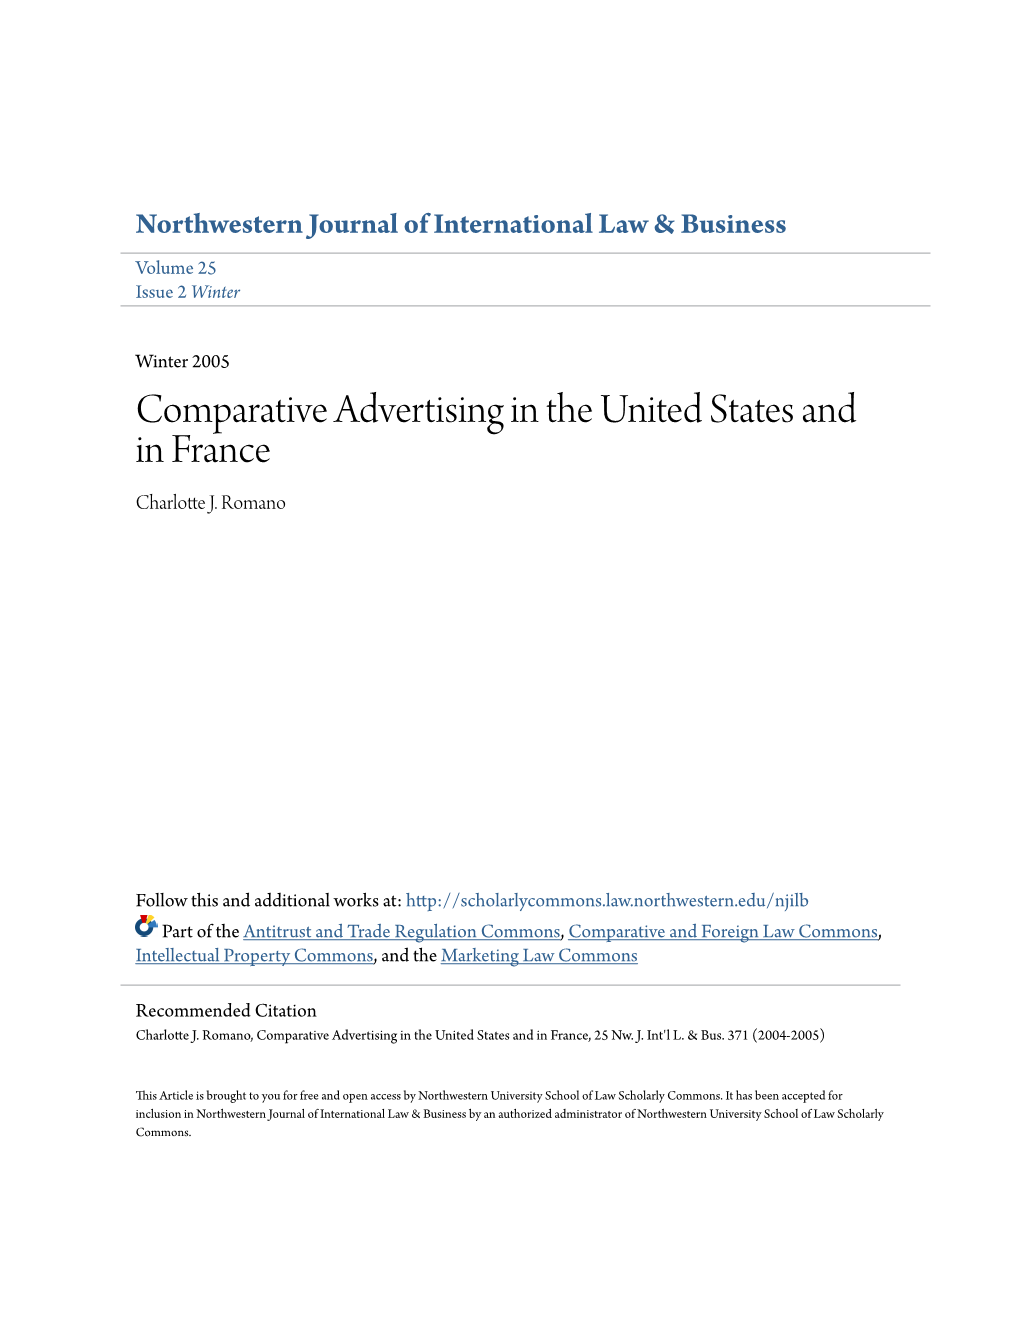 Comparative Advertising in the United States and in France Charlotte J